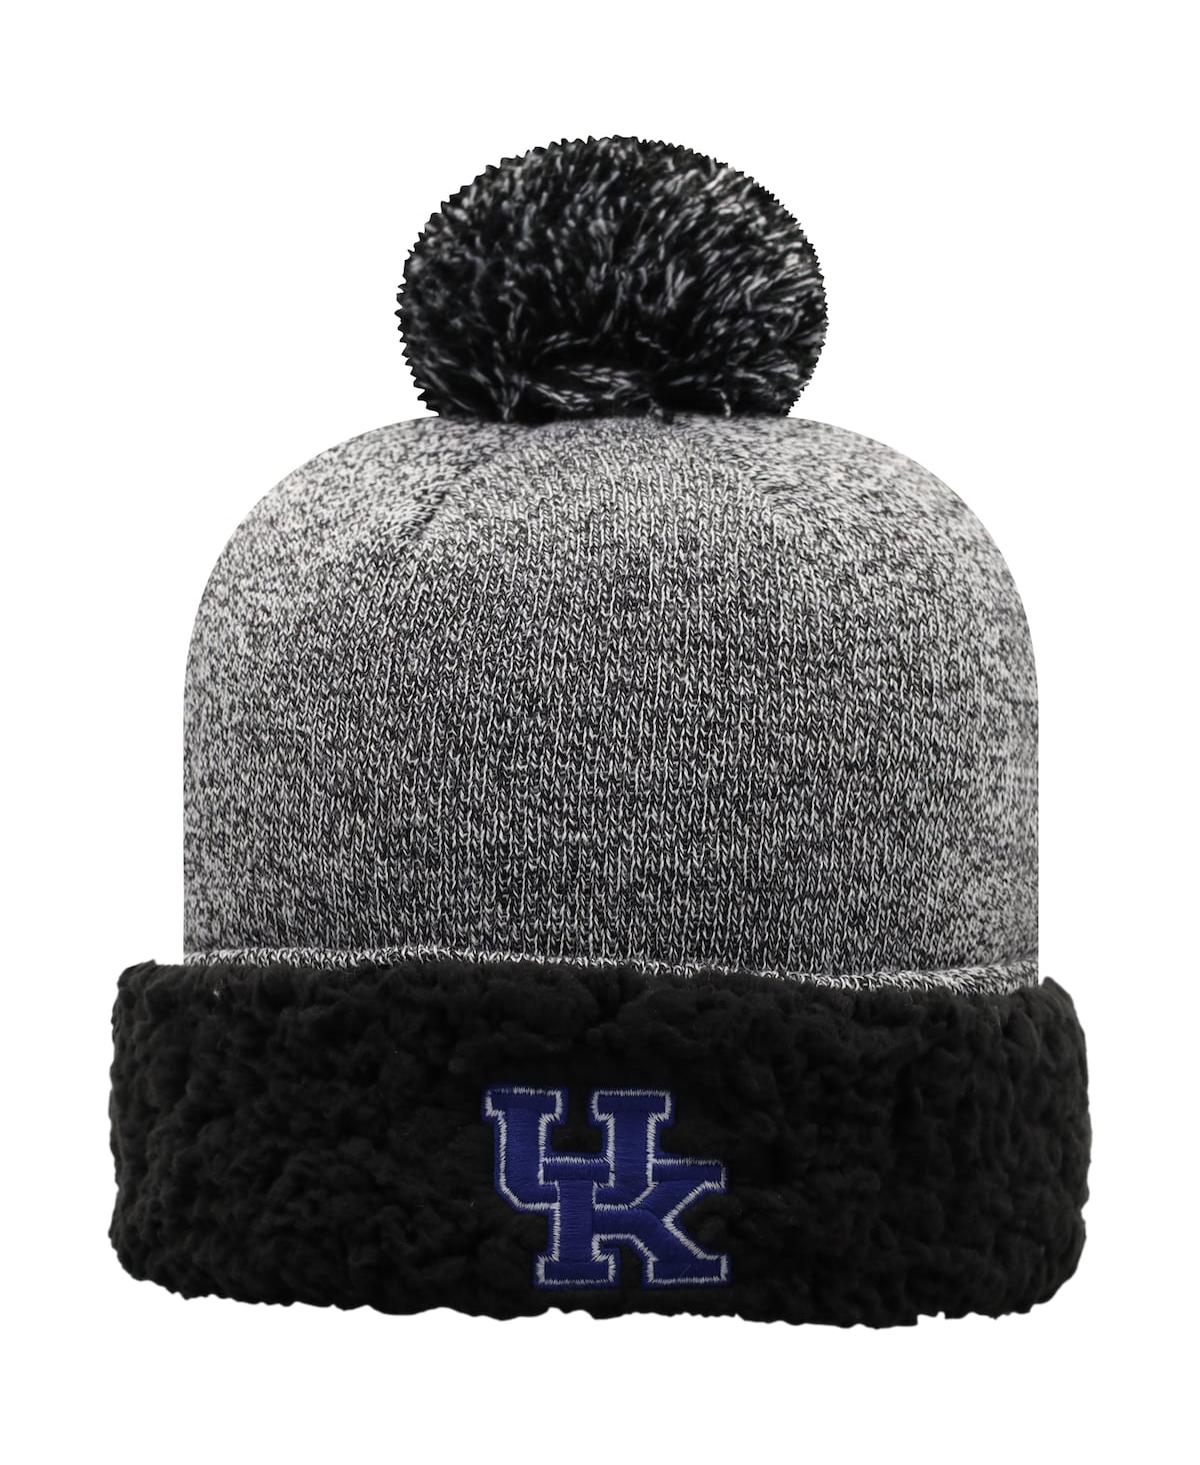 Women's Top of the World Black Kentucky Wildcats Snug Cuffed Knit Hat with Pom - Black